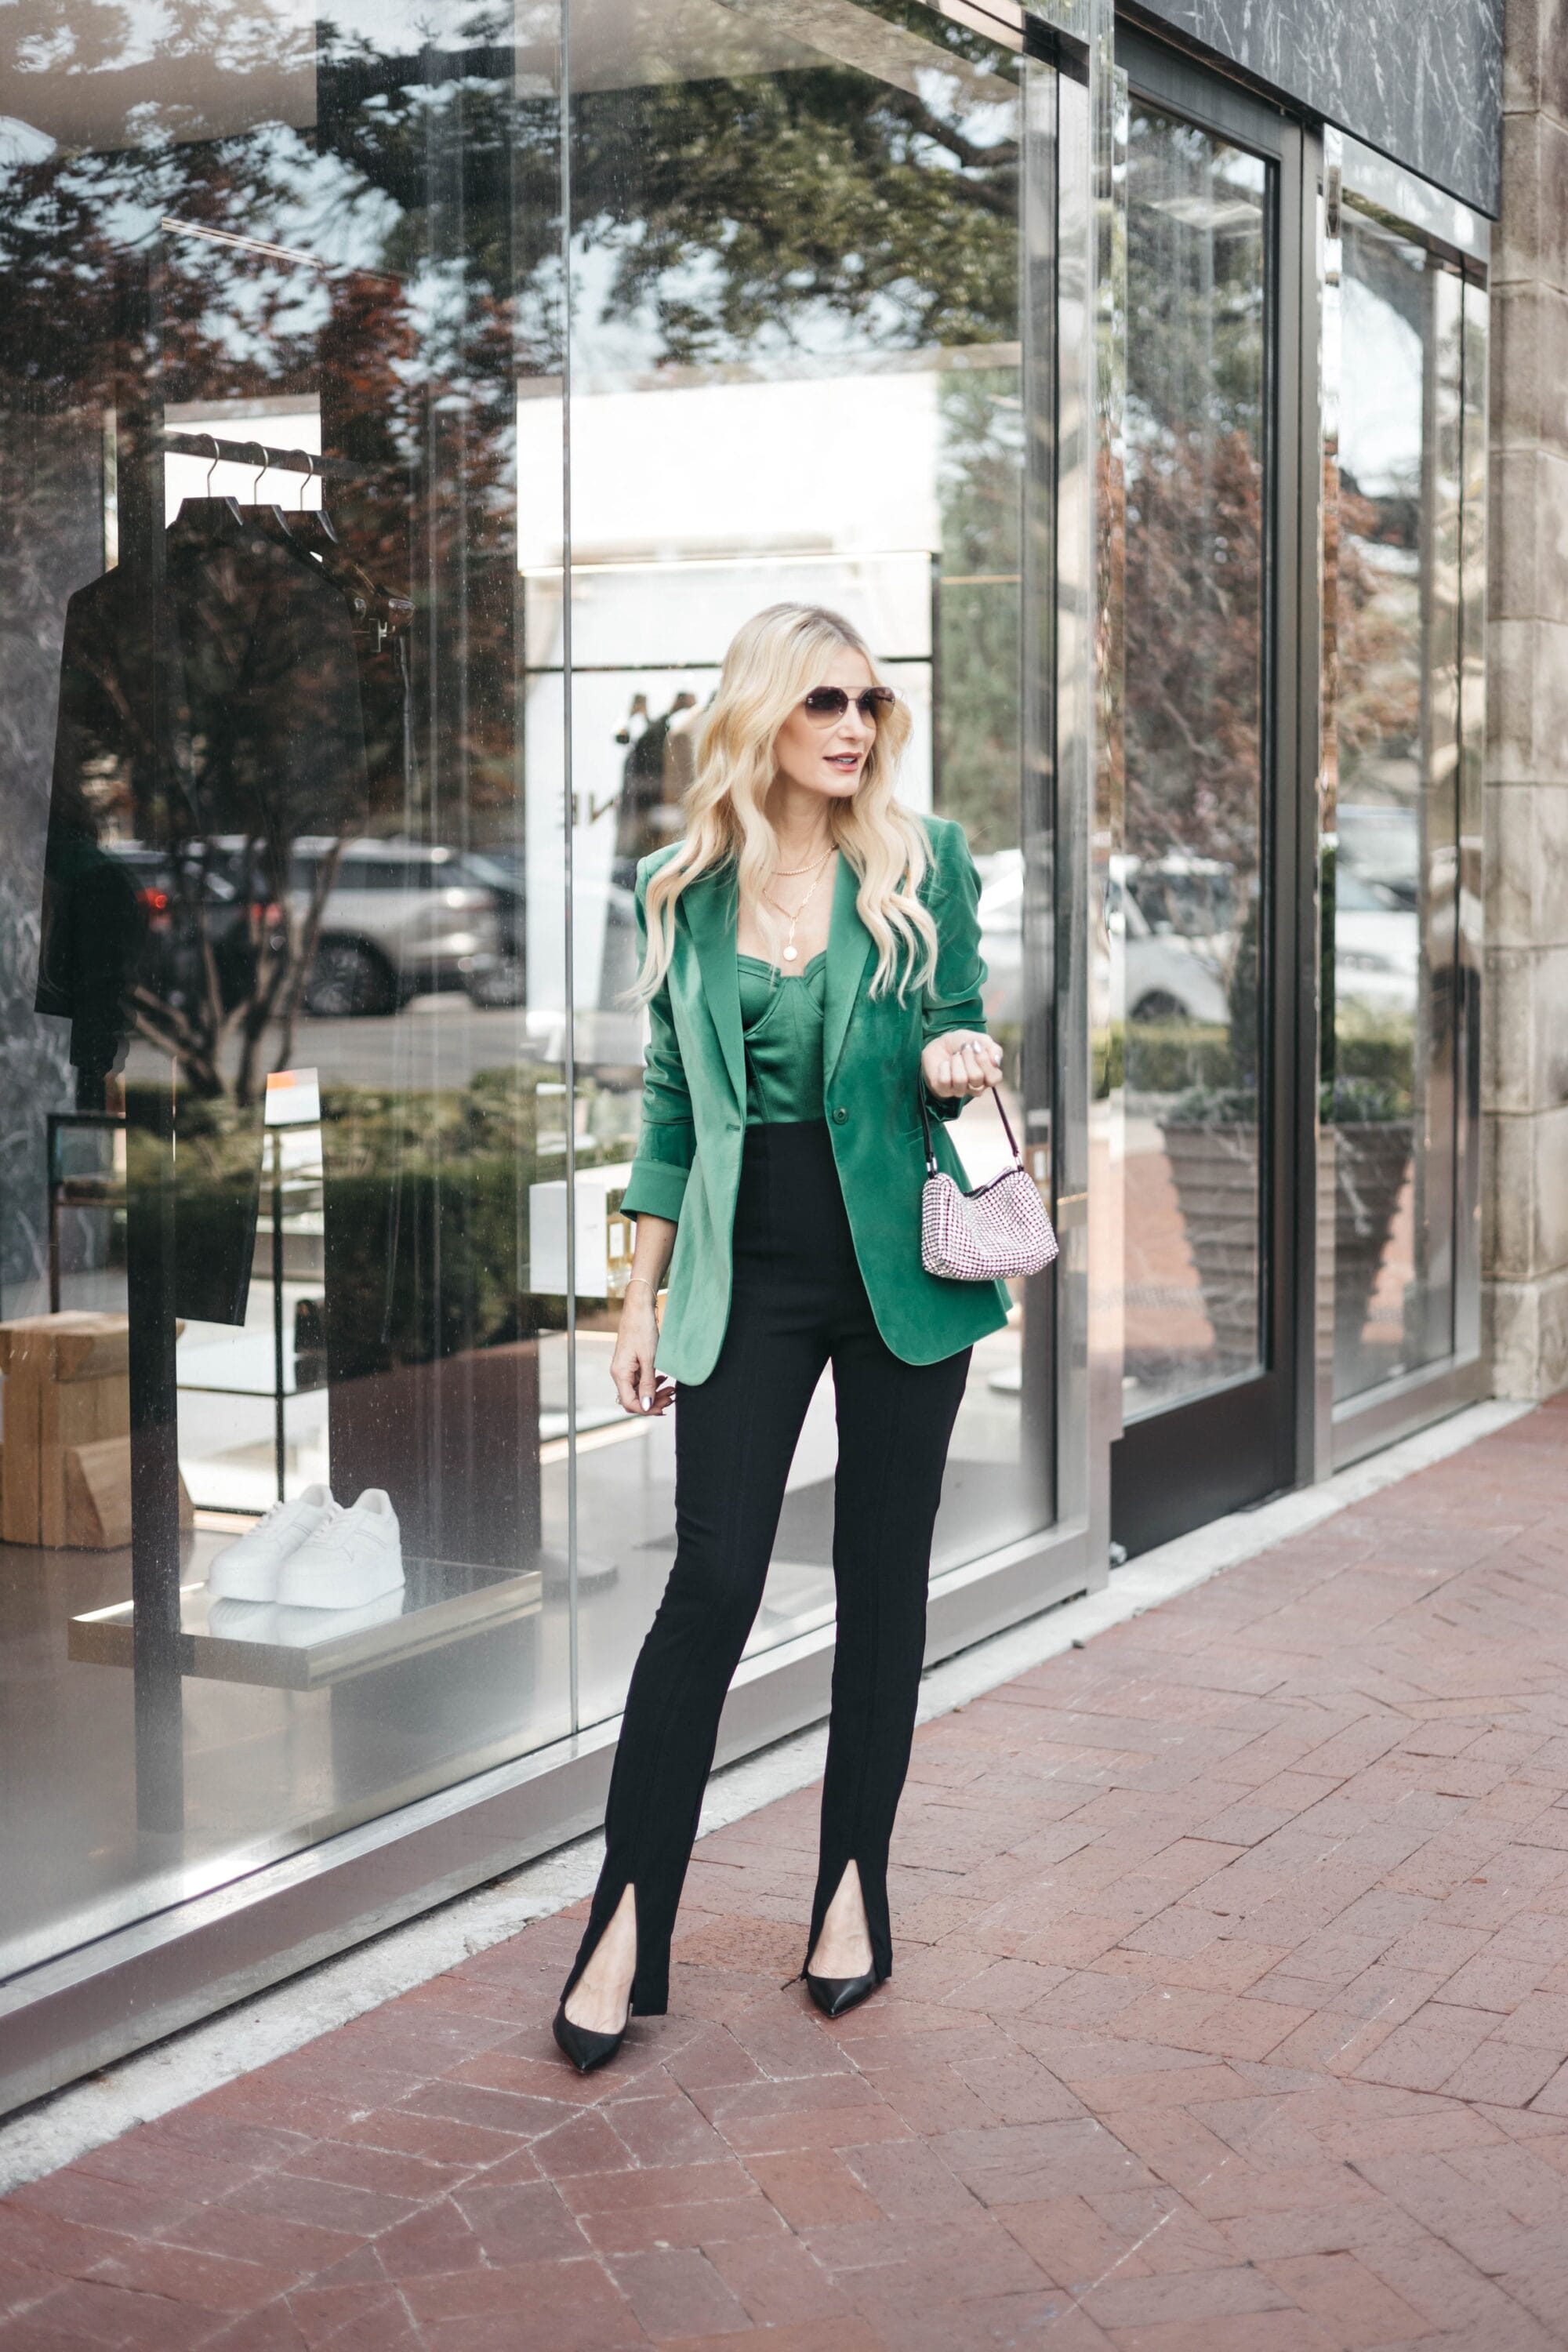 How to Wear Holiday Green Pants  Green pants, How to wear, Holiday outfits